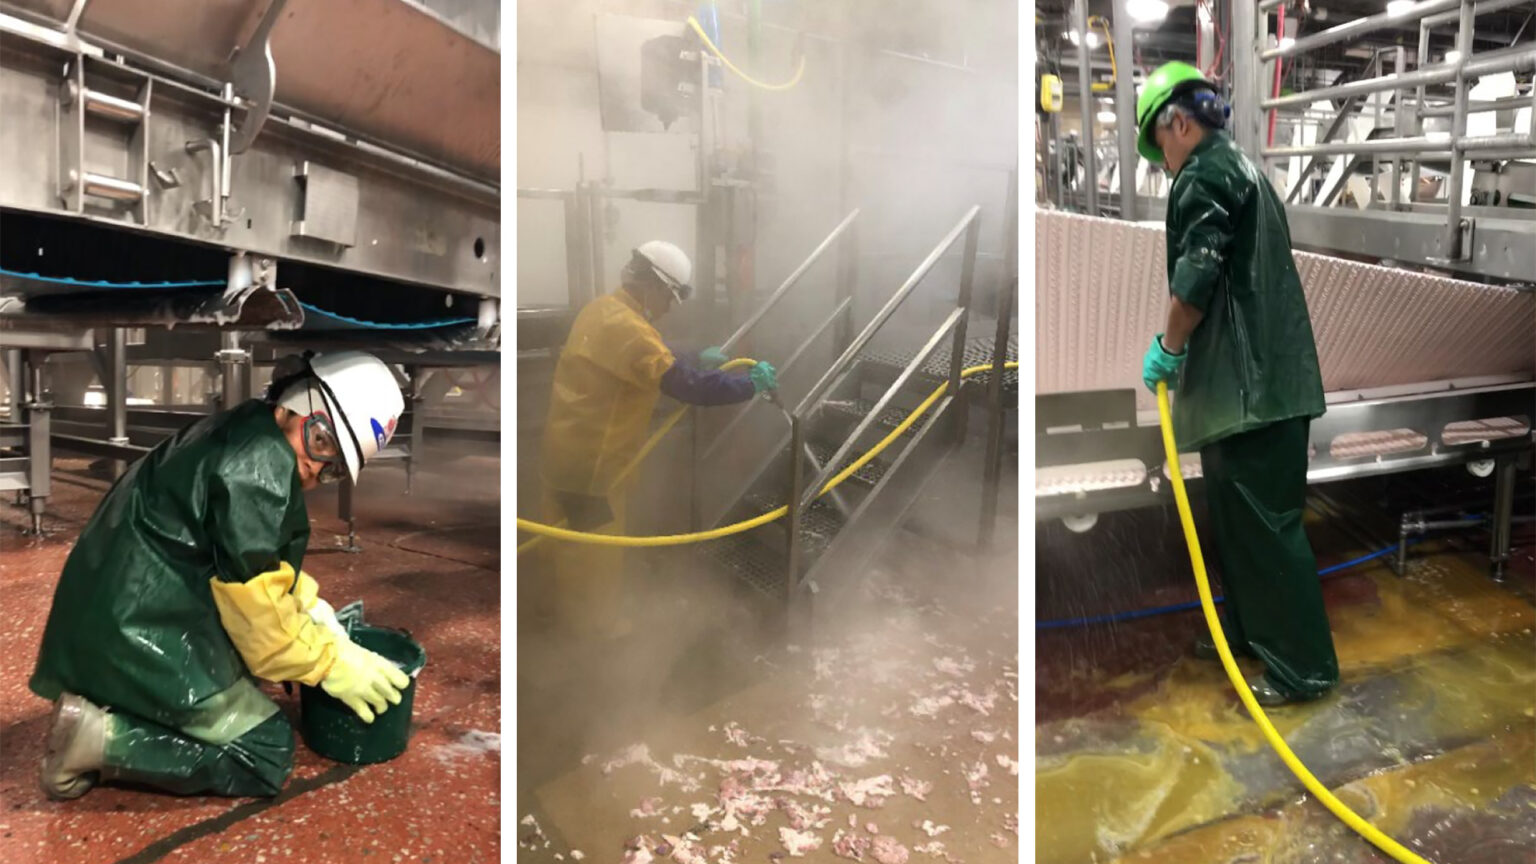 Three side-by-side photos show workers in meatpacking plants wearing protective gear, including coats and pants, helmets and goggles, working to clean floors and equipment of animal byproducts in wet conditions.